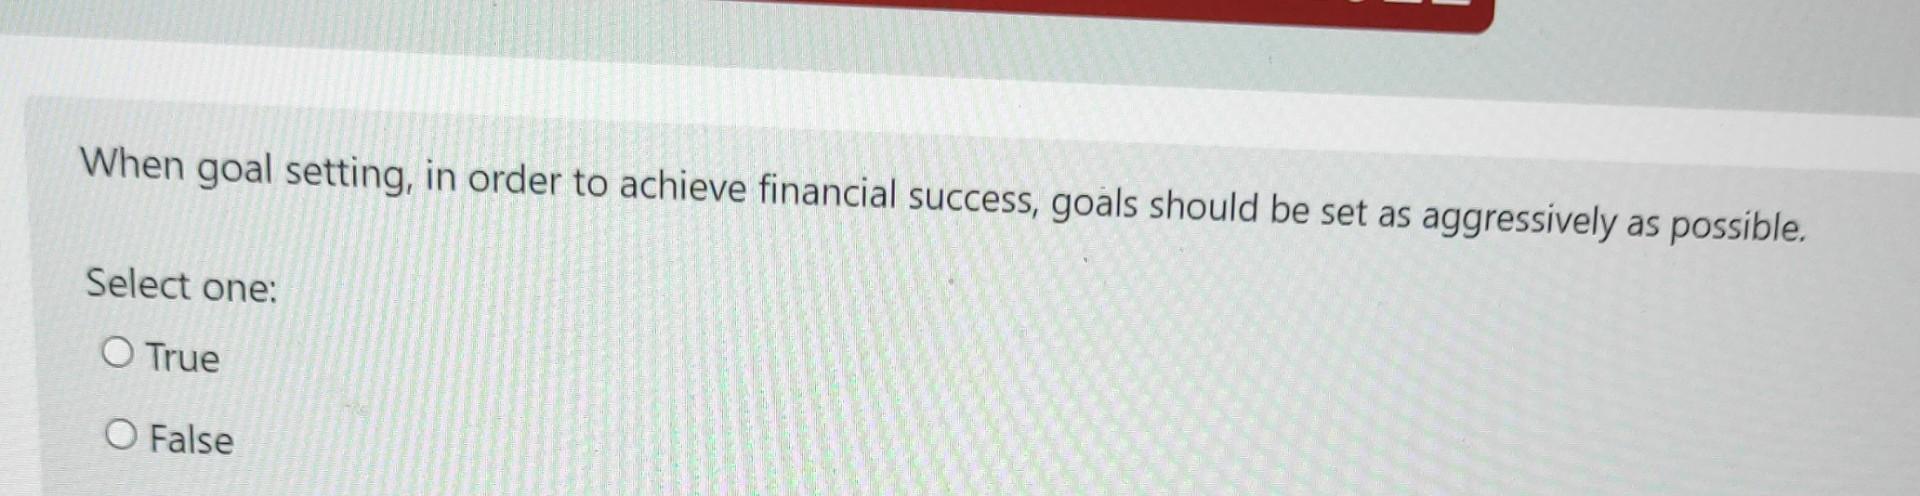 When goal setting, in order to achieve financial success, goals should be set as aggressively as possible. Select one: O True